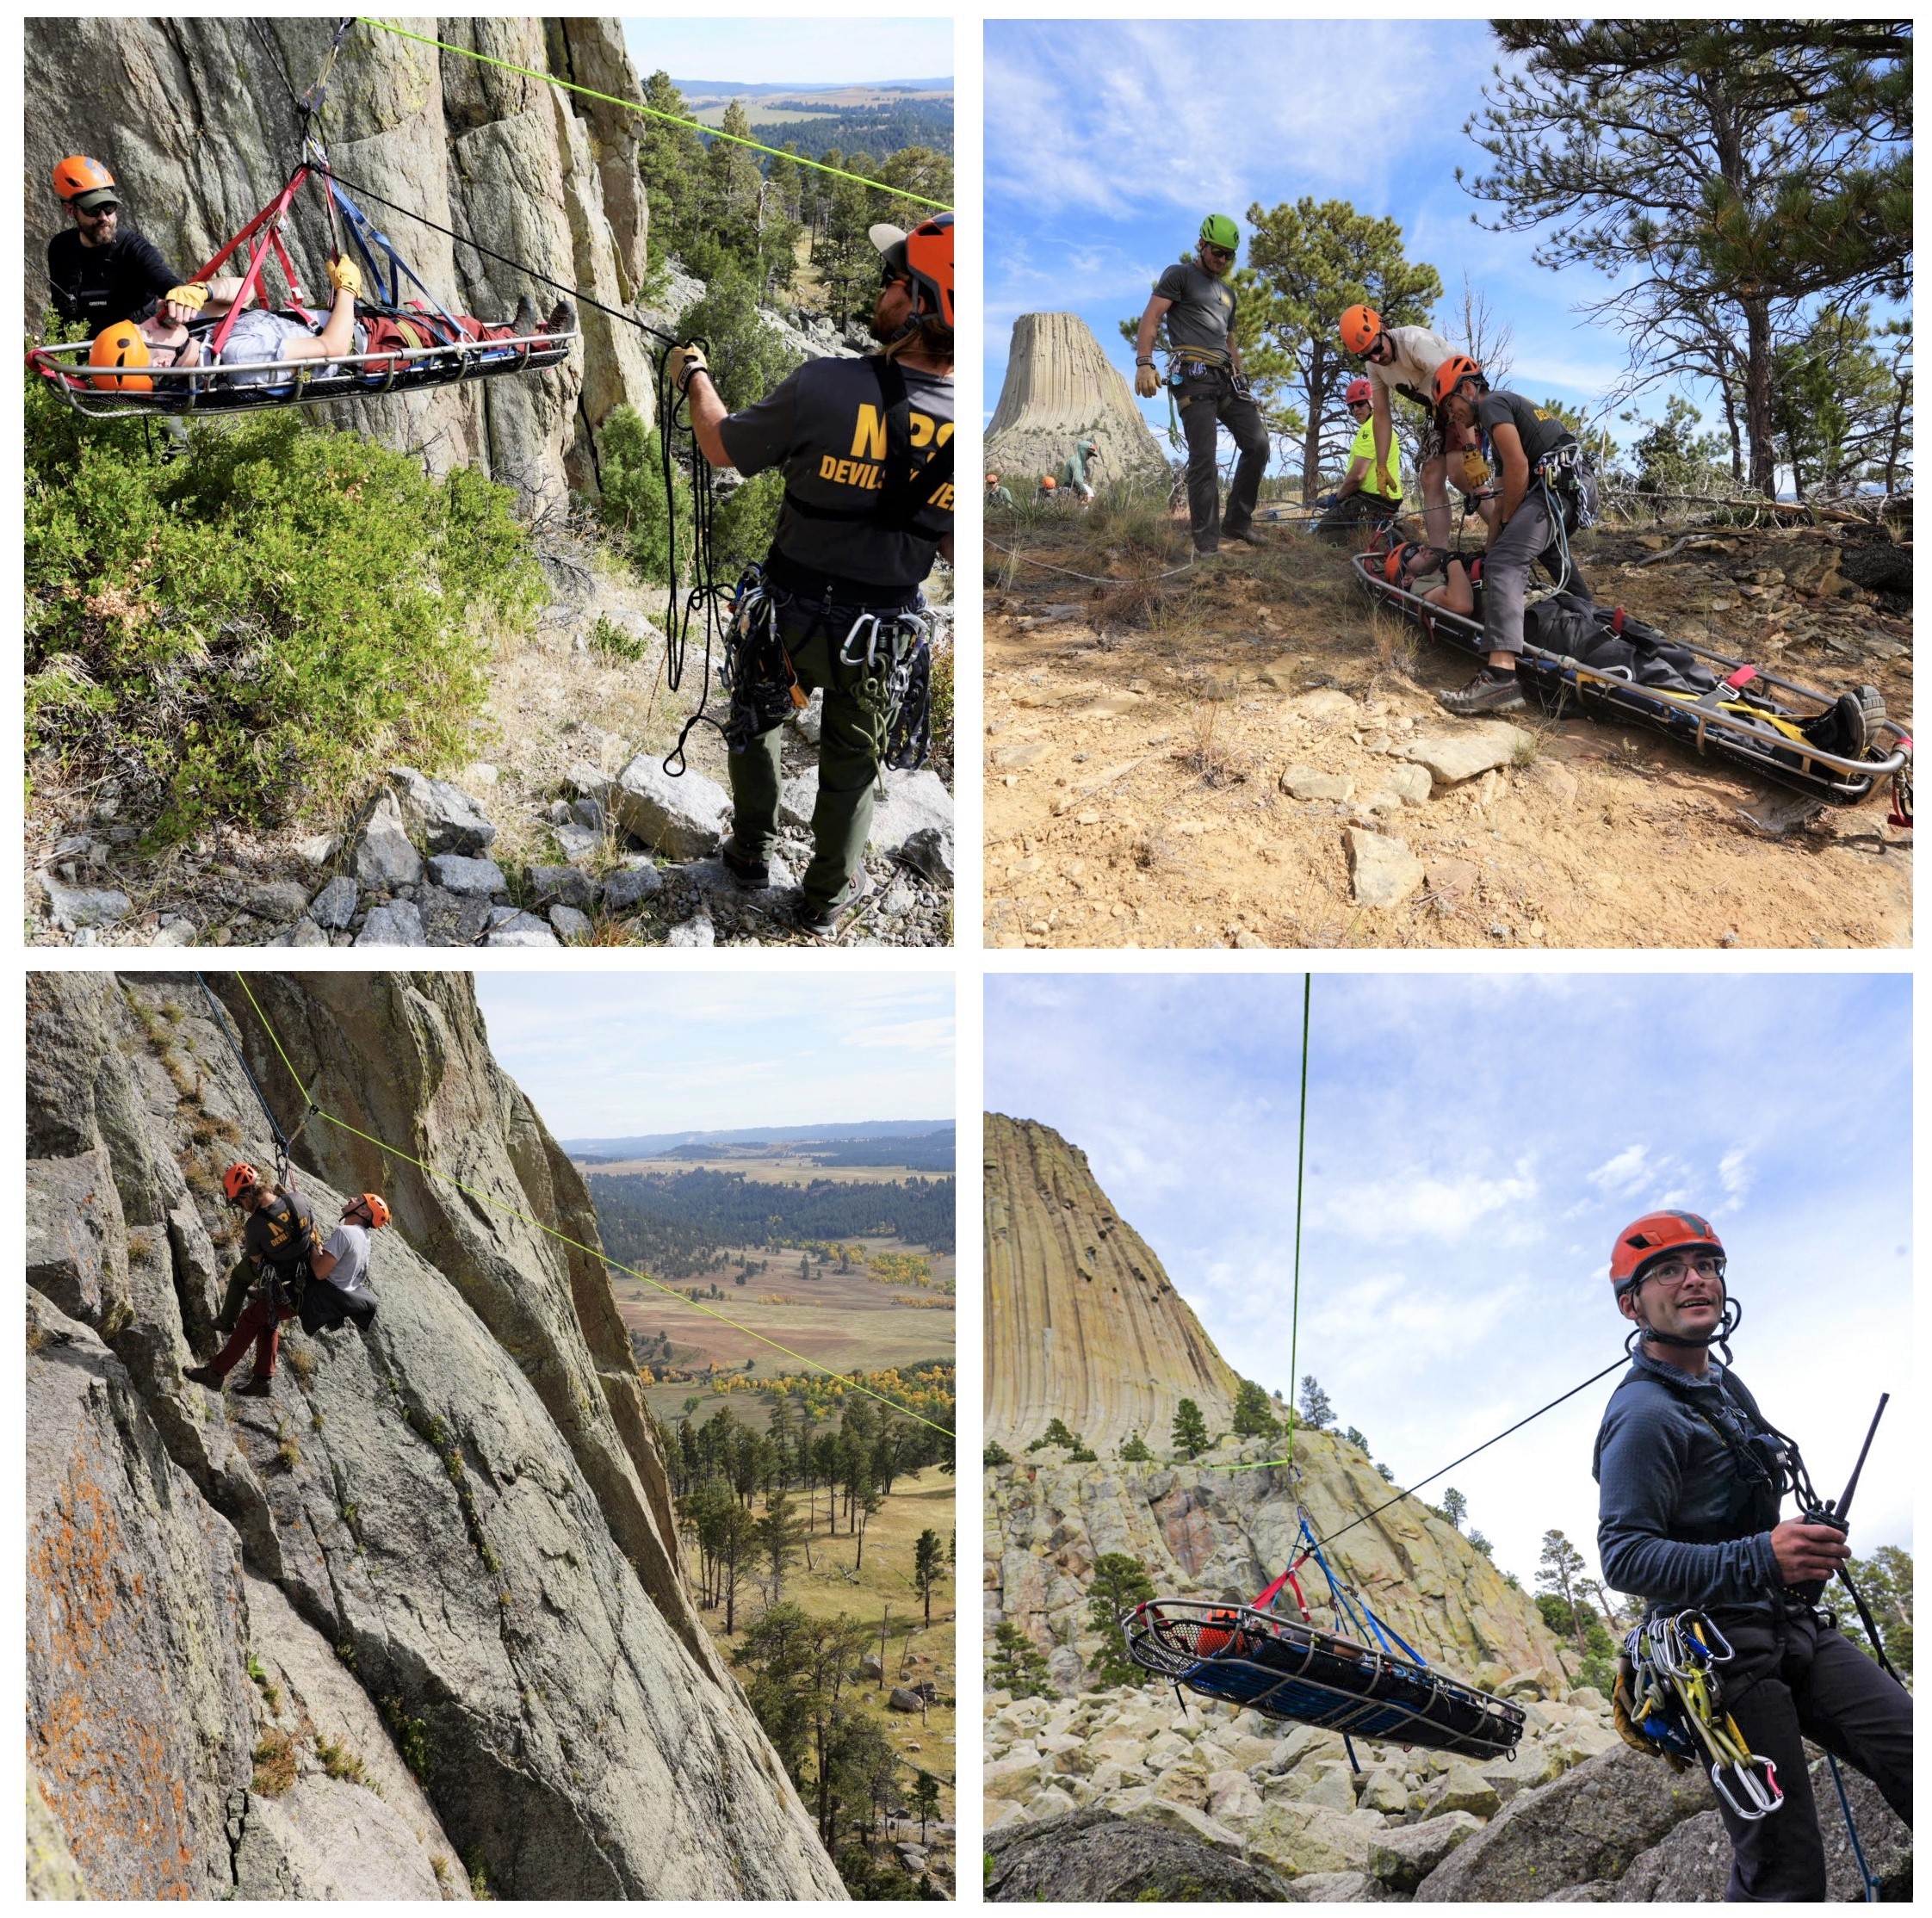 4 photos rescue personnel lowering patients in a backboard down devils tower in various ways on a sunny day